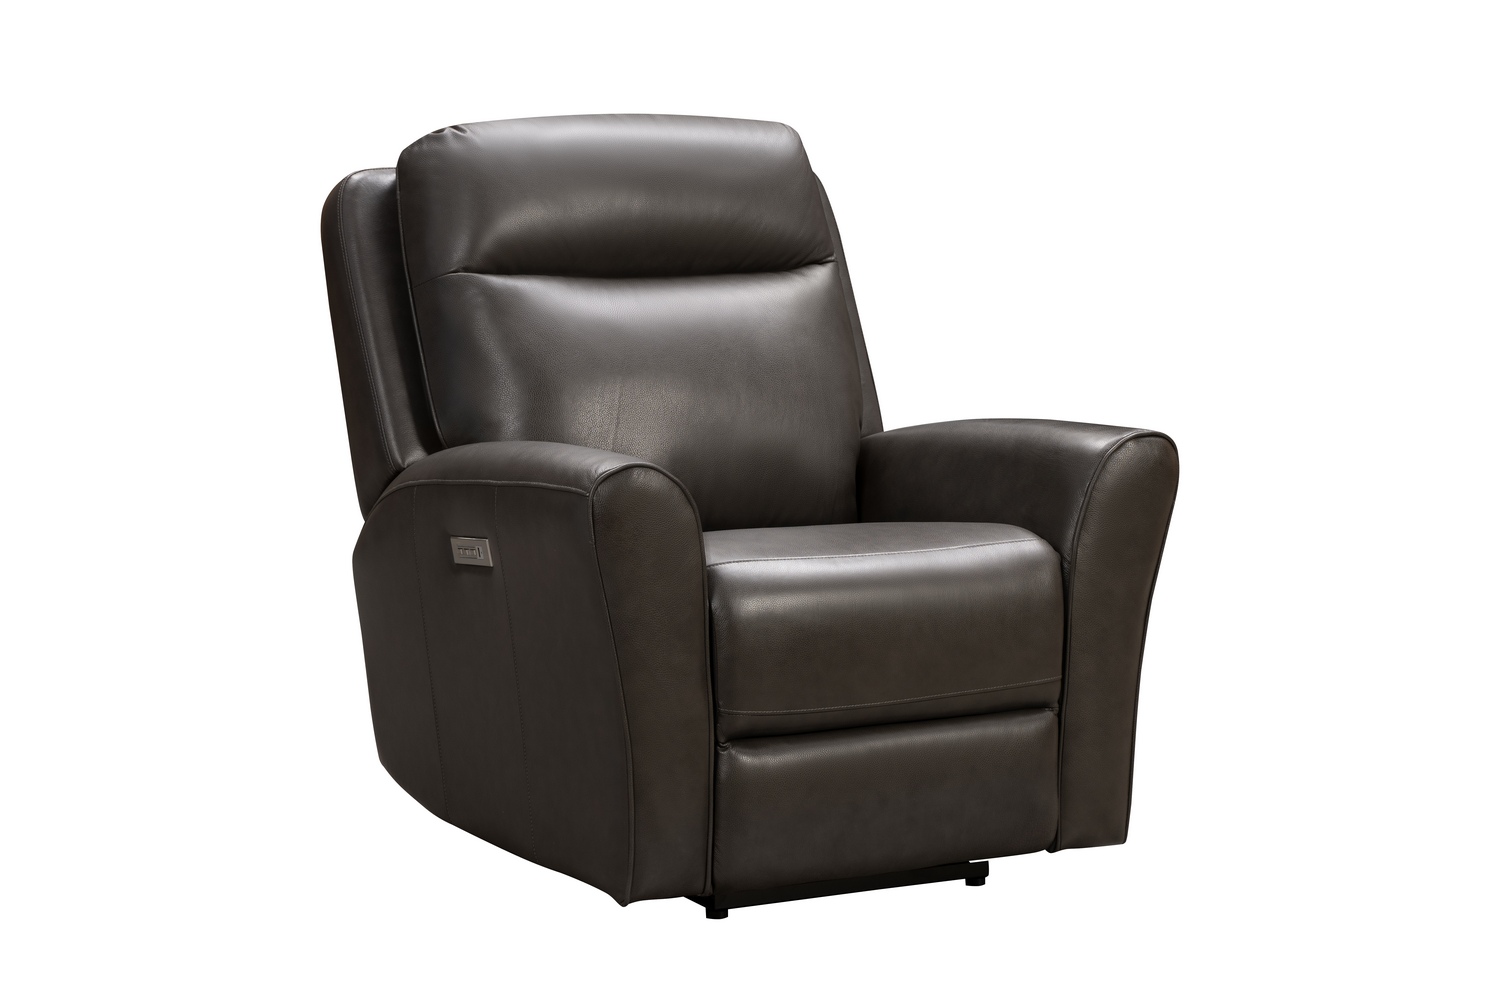 Barcalounger Kelsey Big and Tall Power Recliner Chair with Power Head Rest and Lumbar - Matteo Smokey Gray/Leather Match